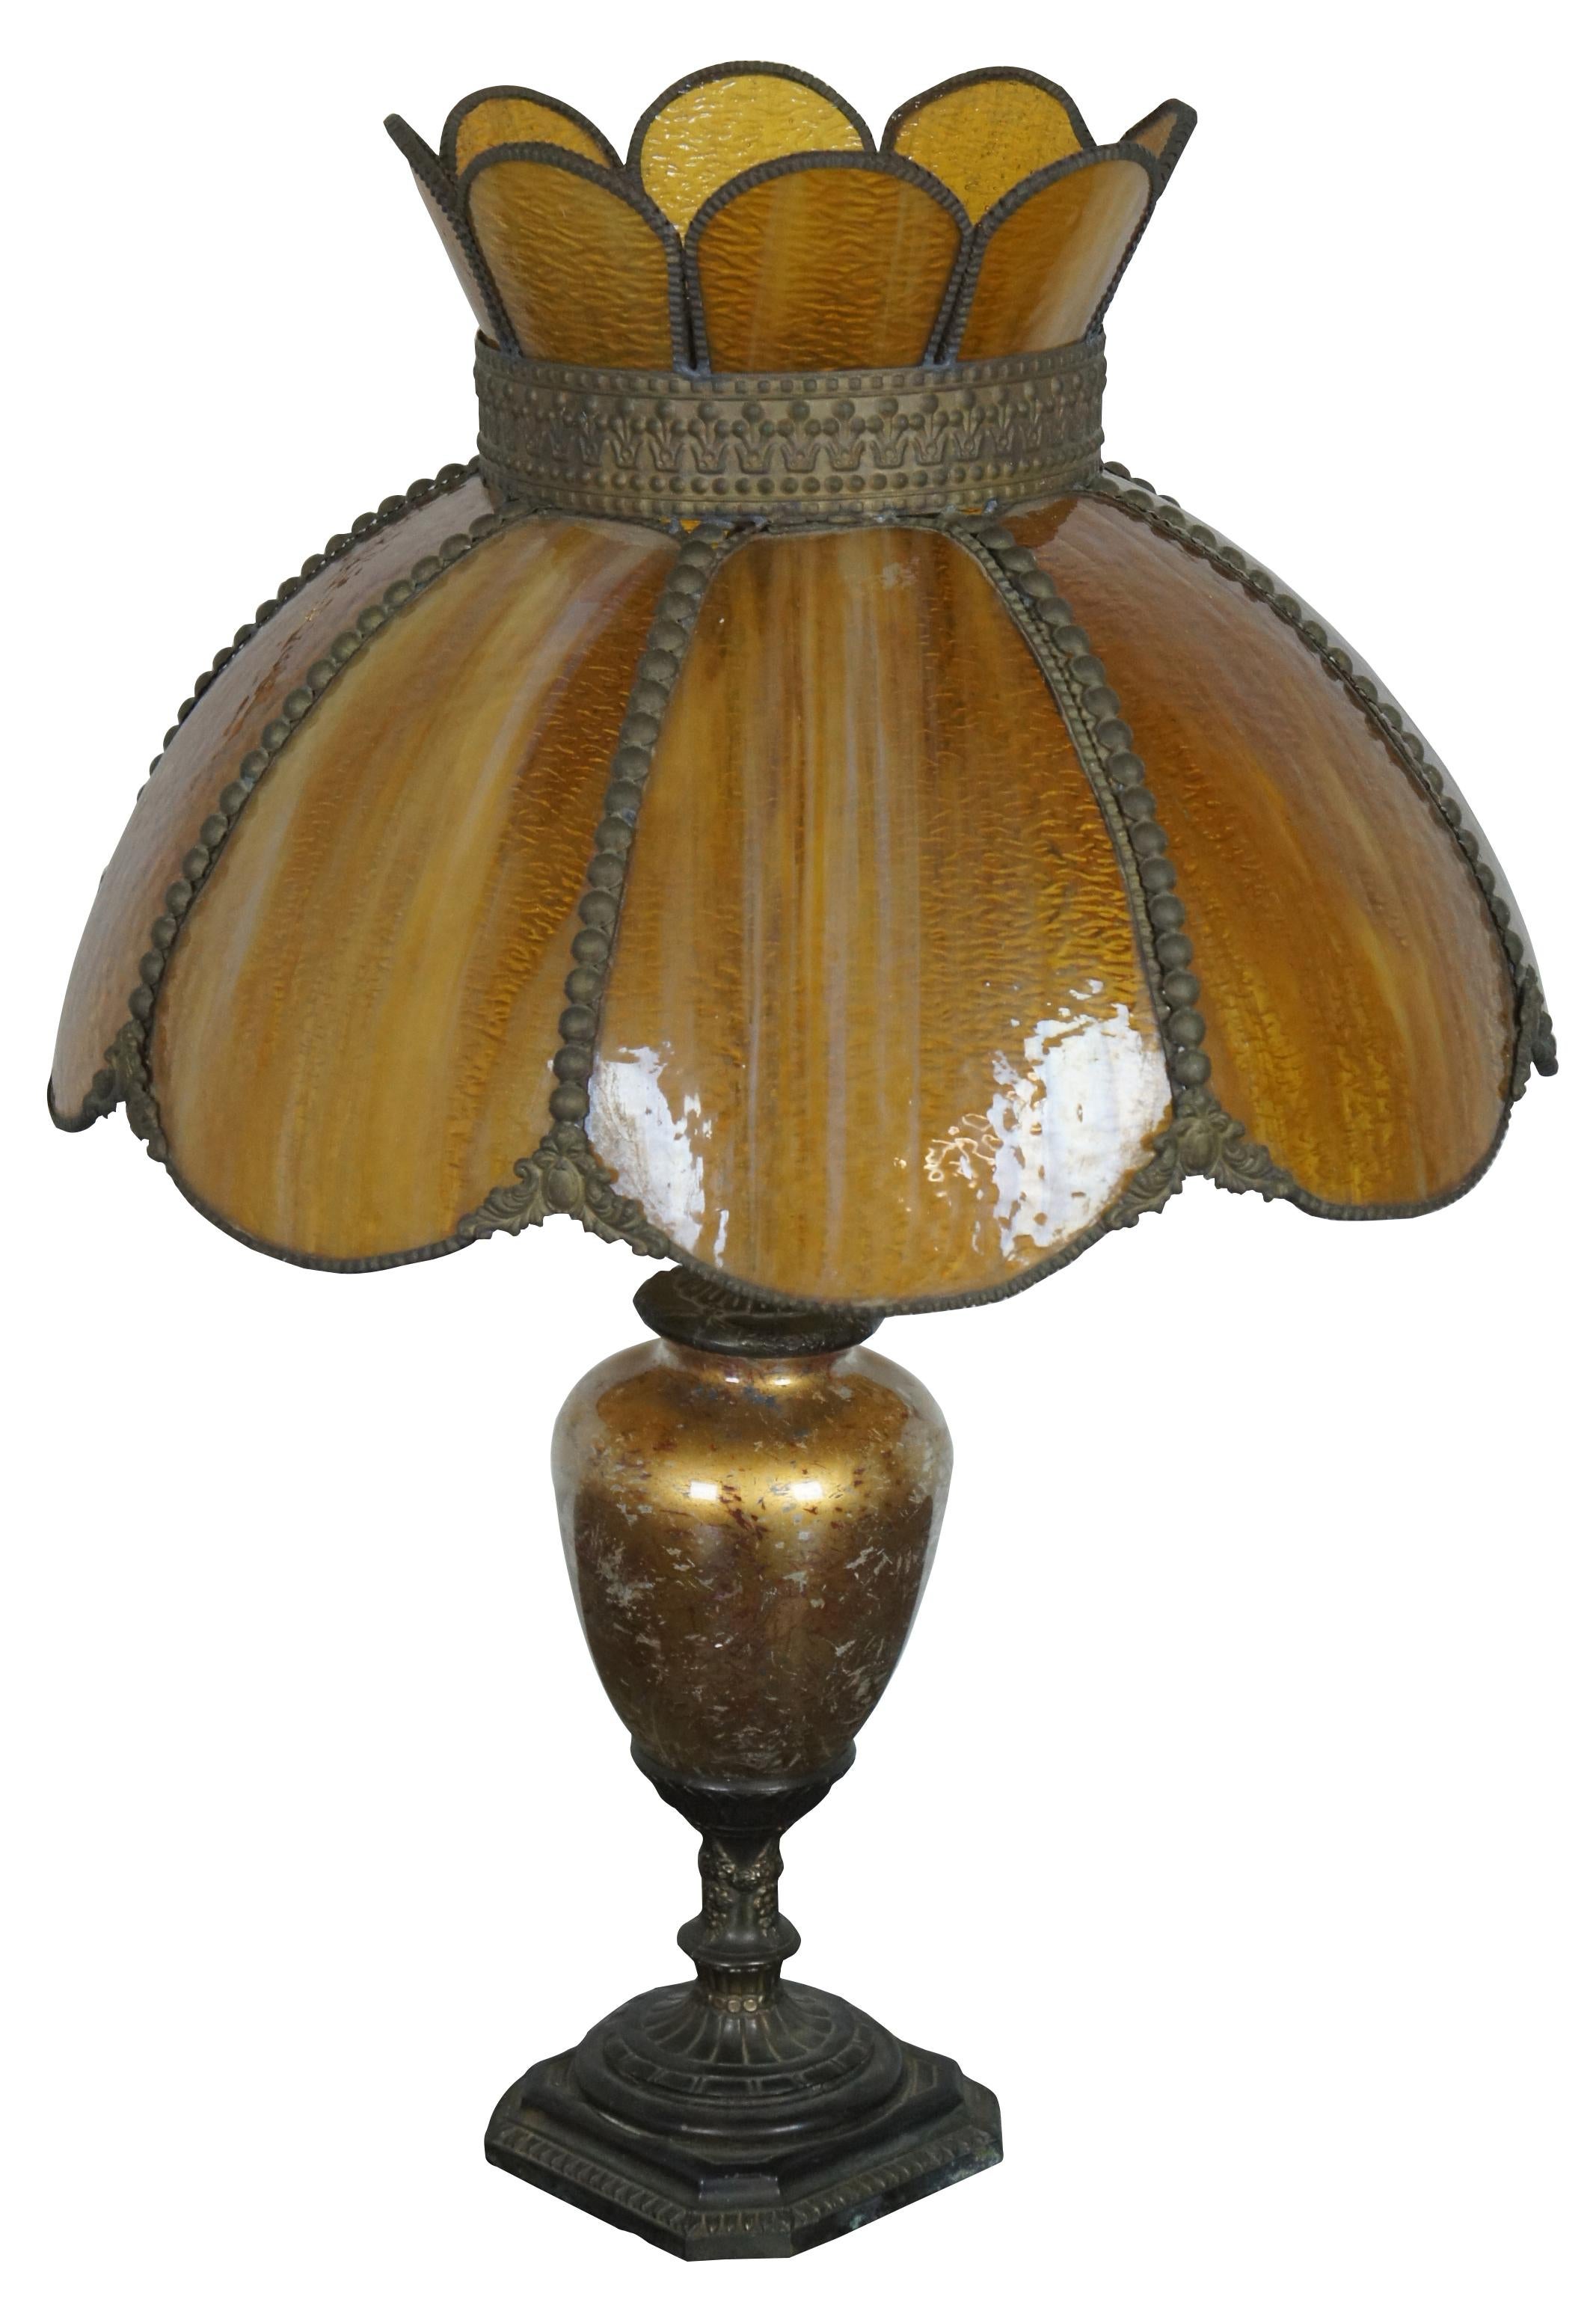 Antique slag glass table lamp. Features a golden reverse painted urn body and flower shaped, Tiffany style amber slag glass shade.

Measures: 5.5” x 23.25” / shade - 18” x 11.25” / height with shade – 25.25” (diameter x height).